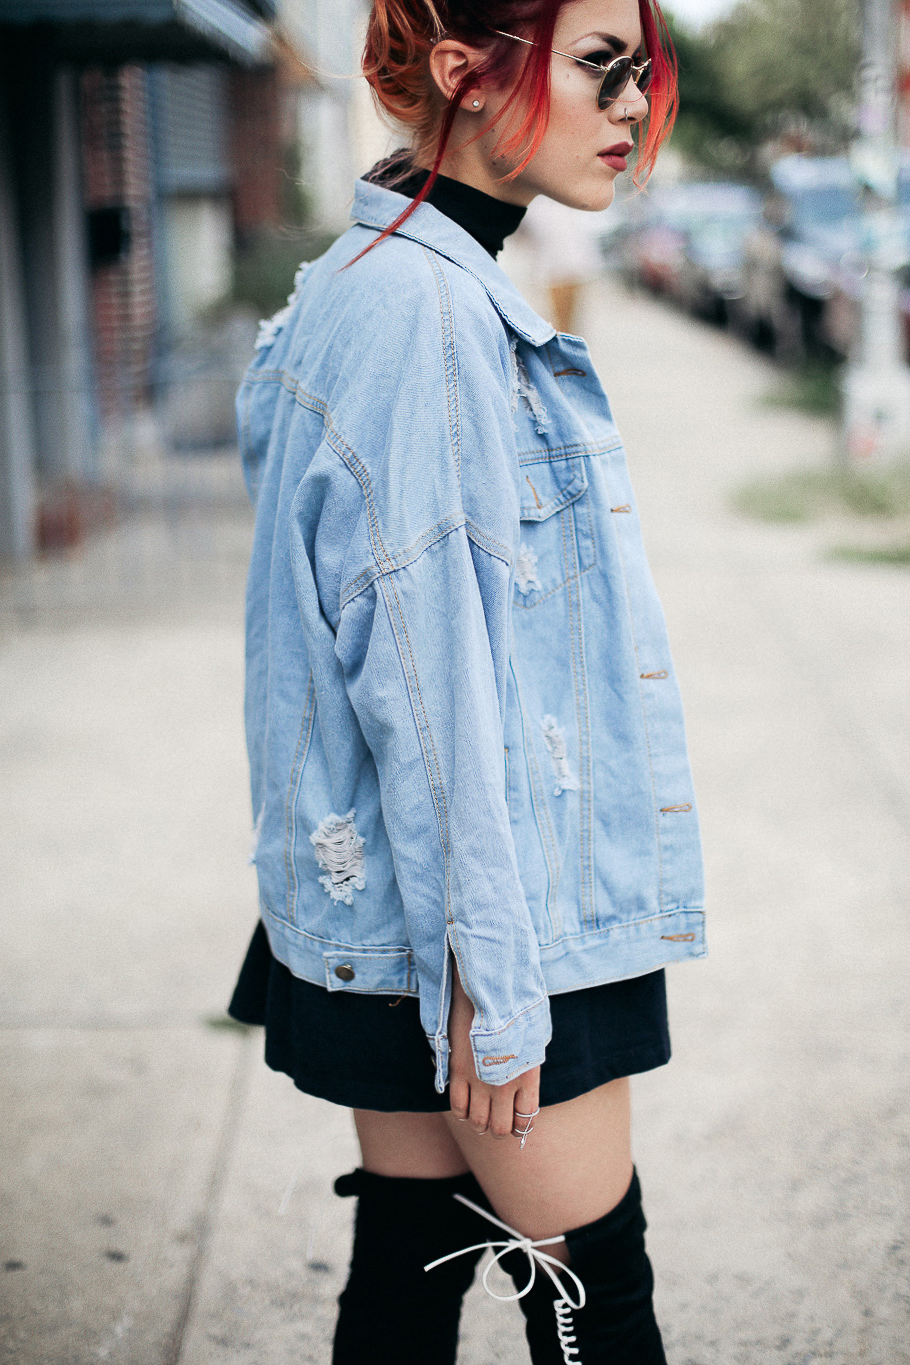 Le Happy wearing McQ thigh high boots and denim jacket